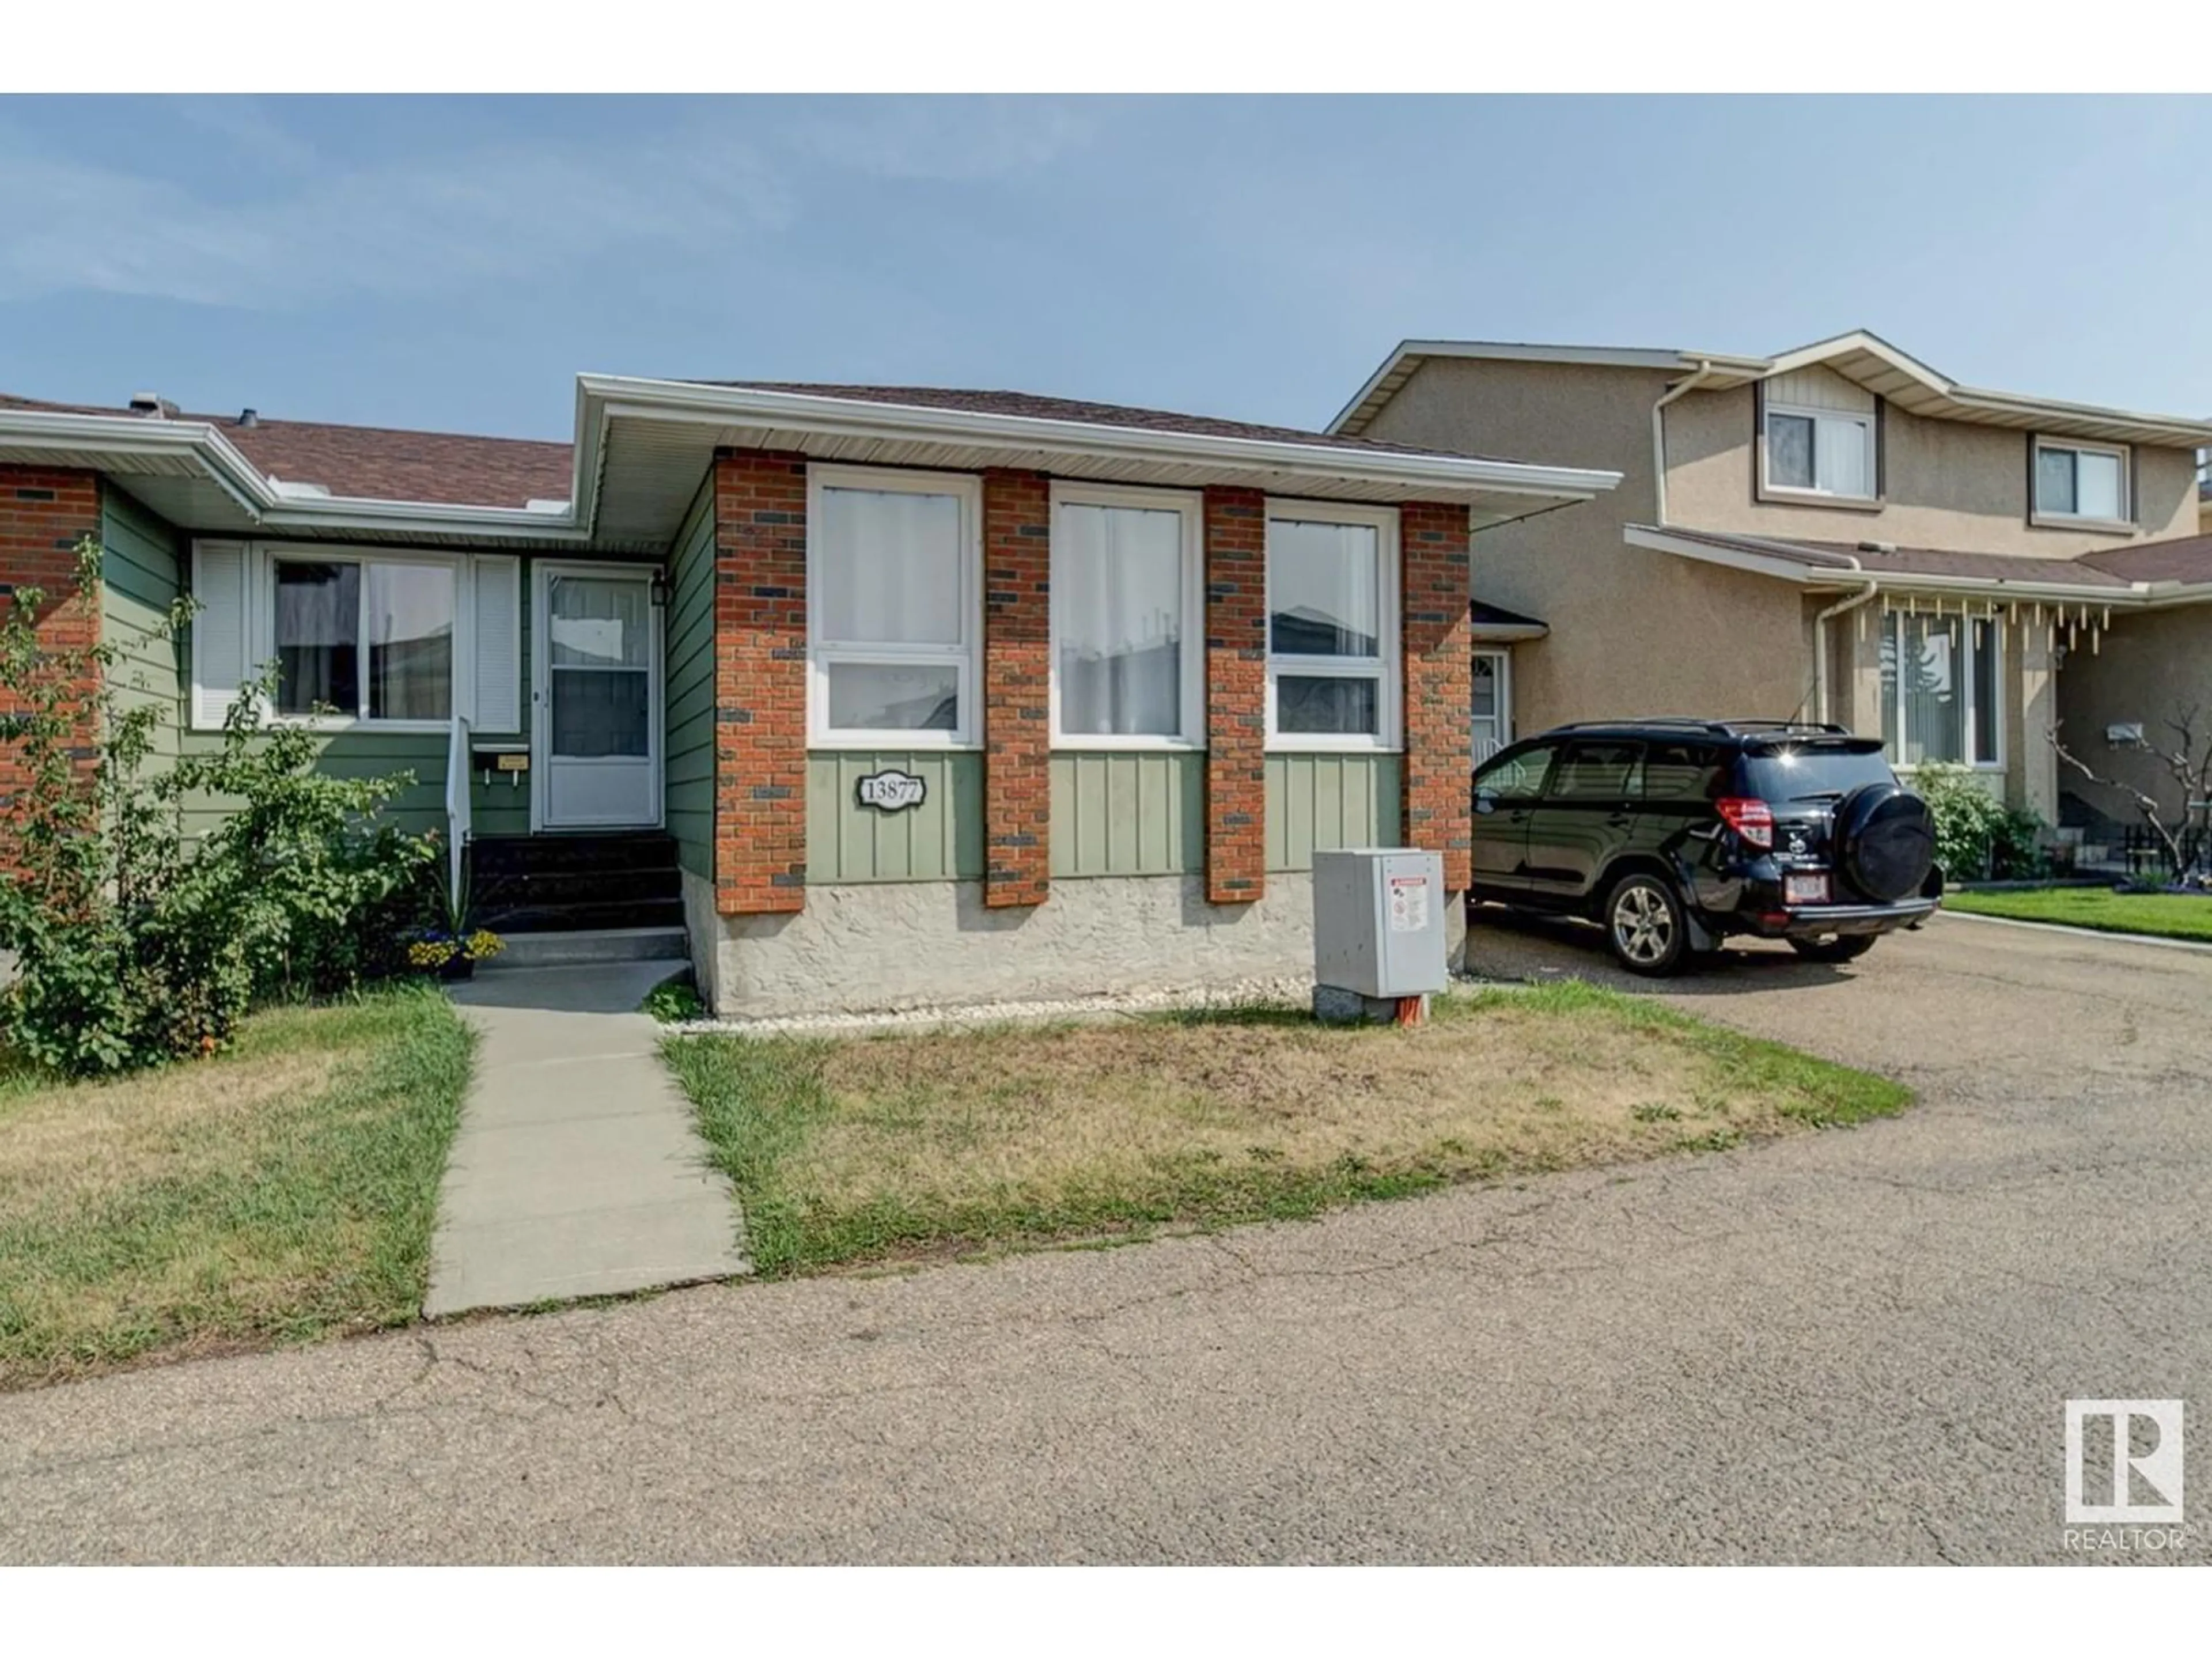 A pic from exterior of the house or condo for 13877 114 ST NW, Edmonton Alberta T5X4A1